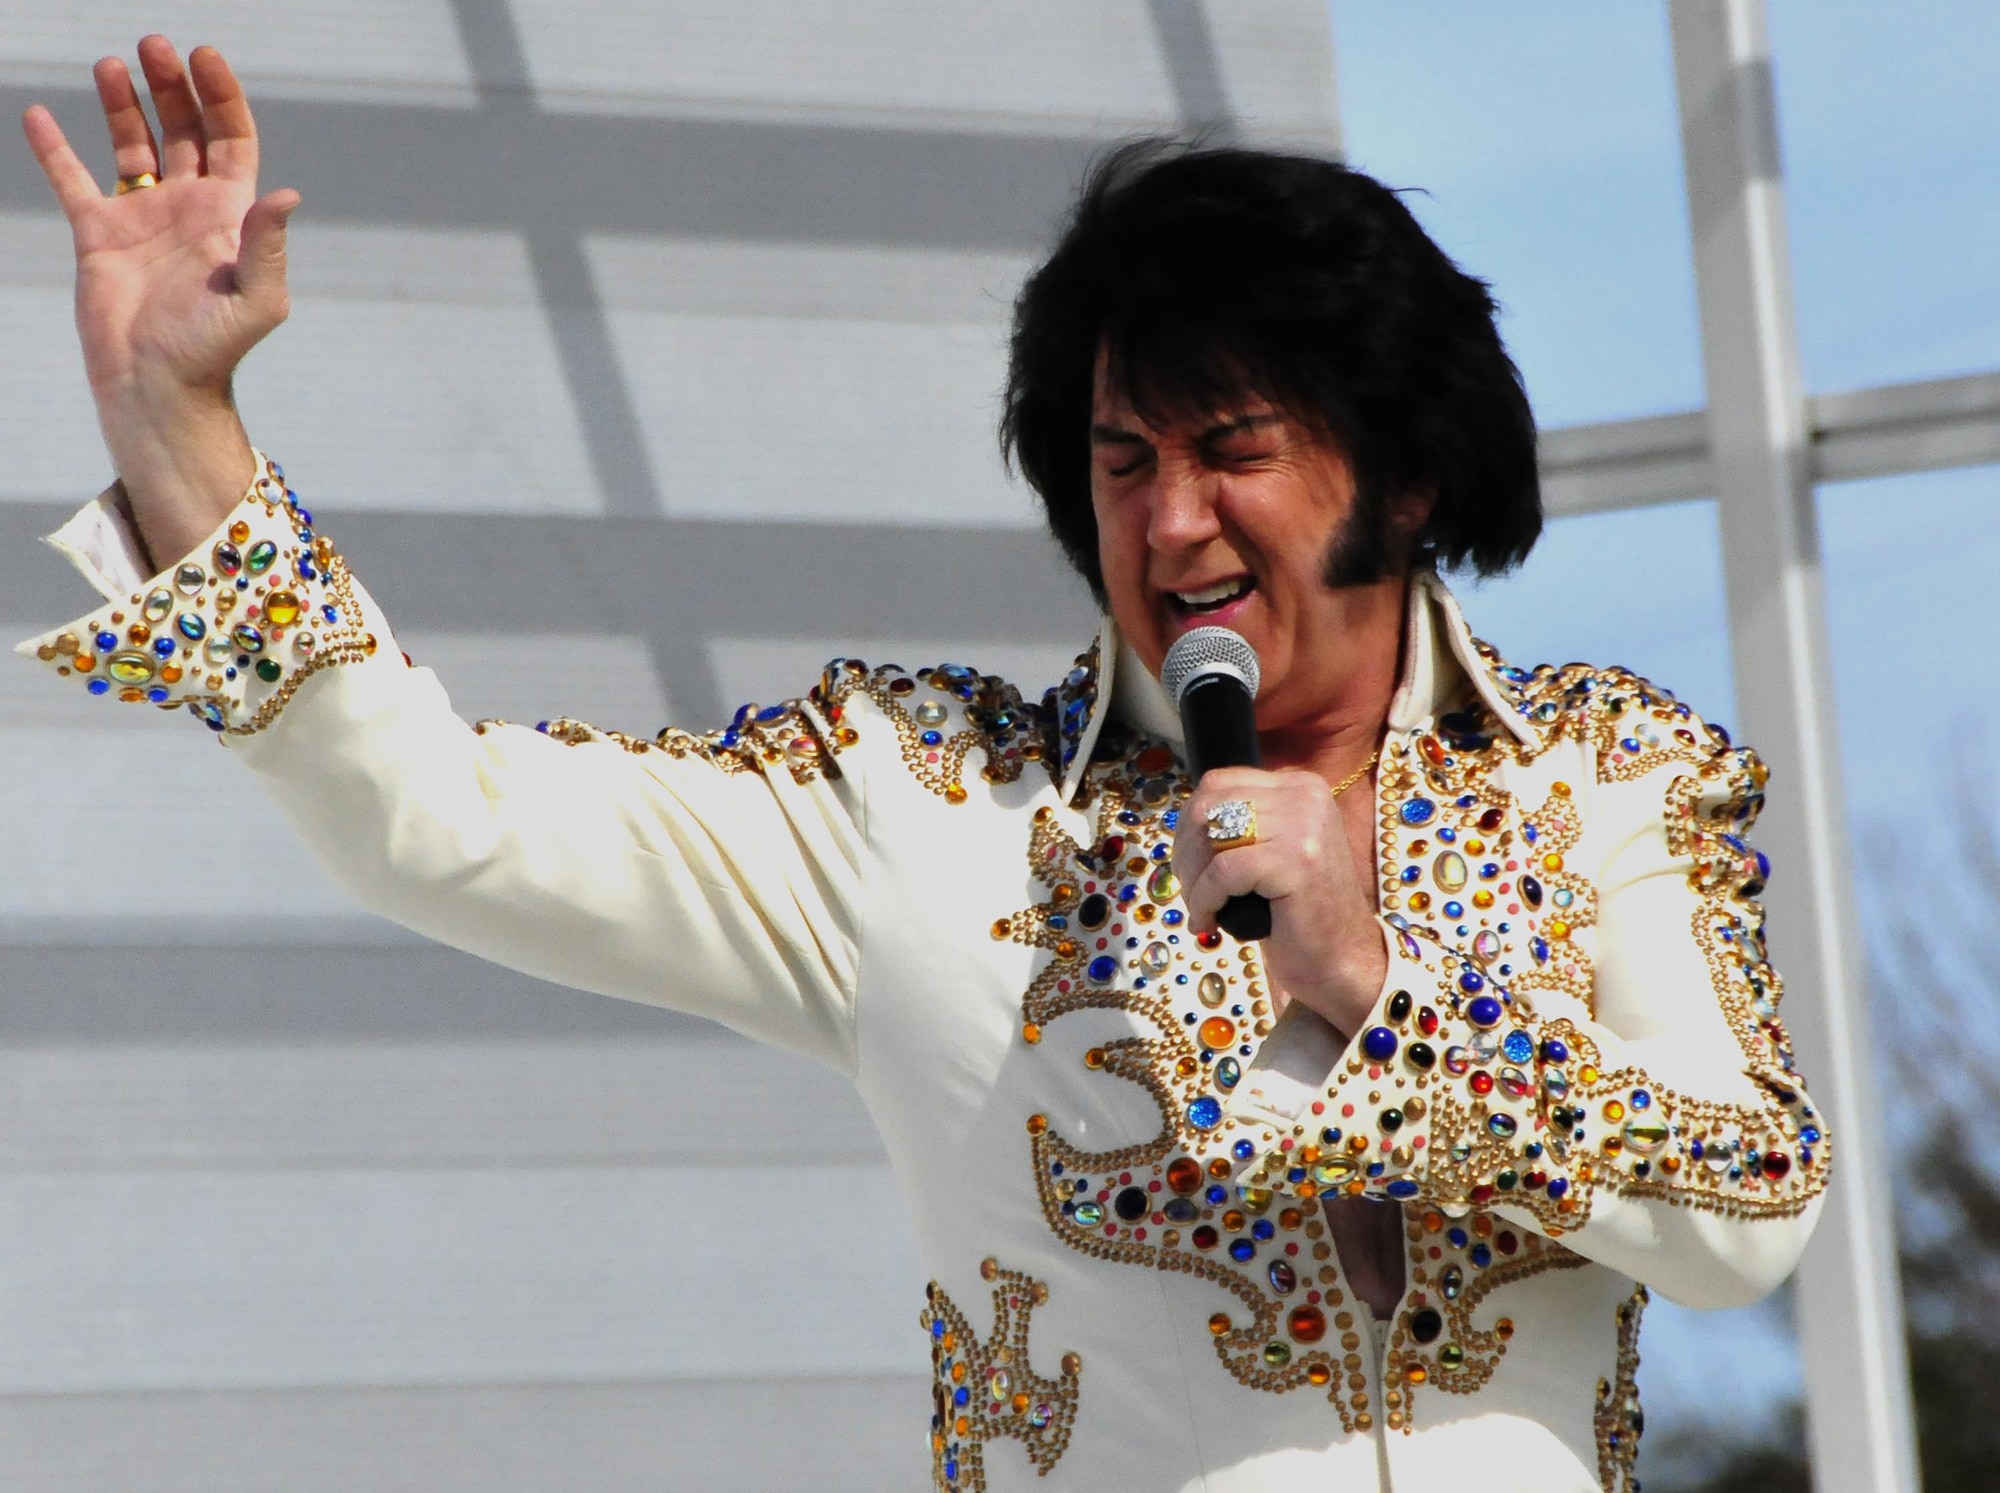 An Elvis impersonator belts out a tune during the 919th Special Operations Wing’s annual Wing Day March 4 at Duke Field, Fla.  The wing sets aside a special day each year to show appreciation for its reservists and their family members. Events included music, food, children’s games, etc.